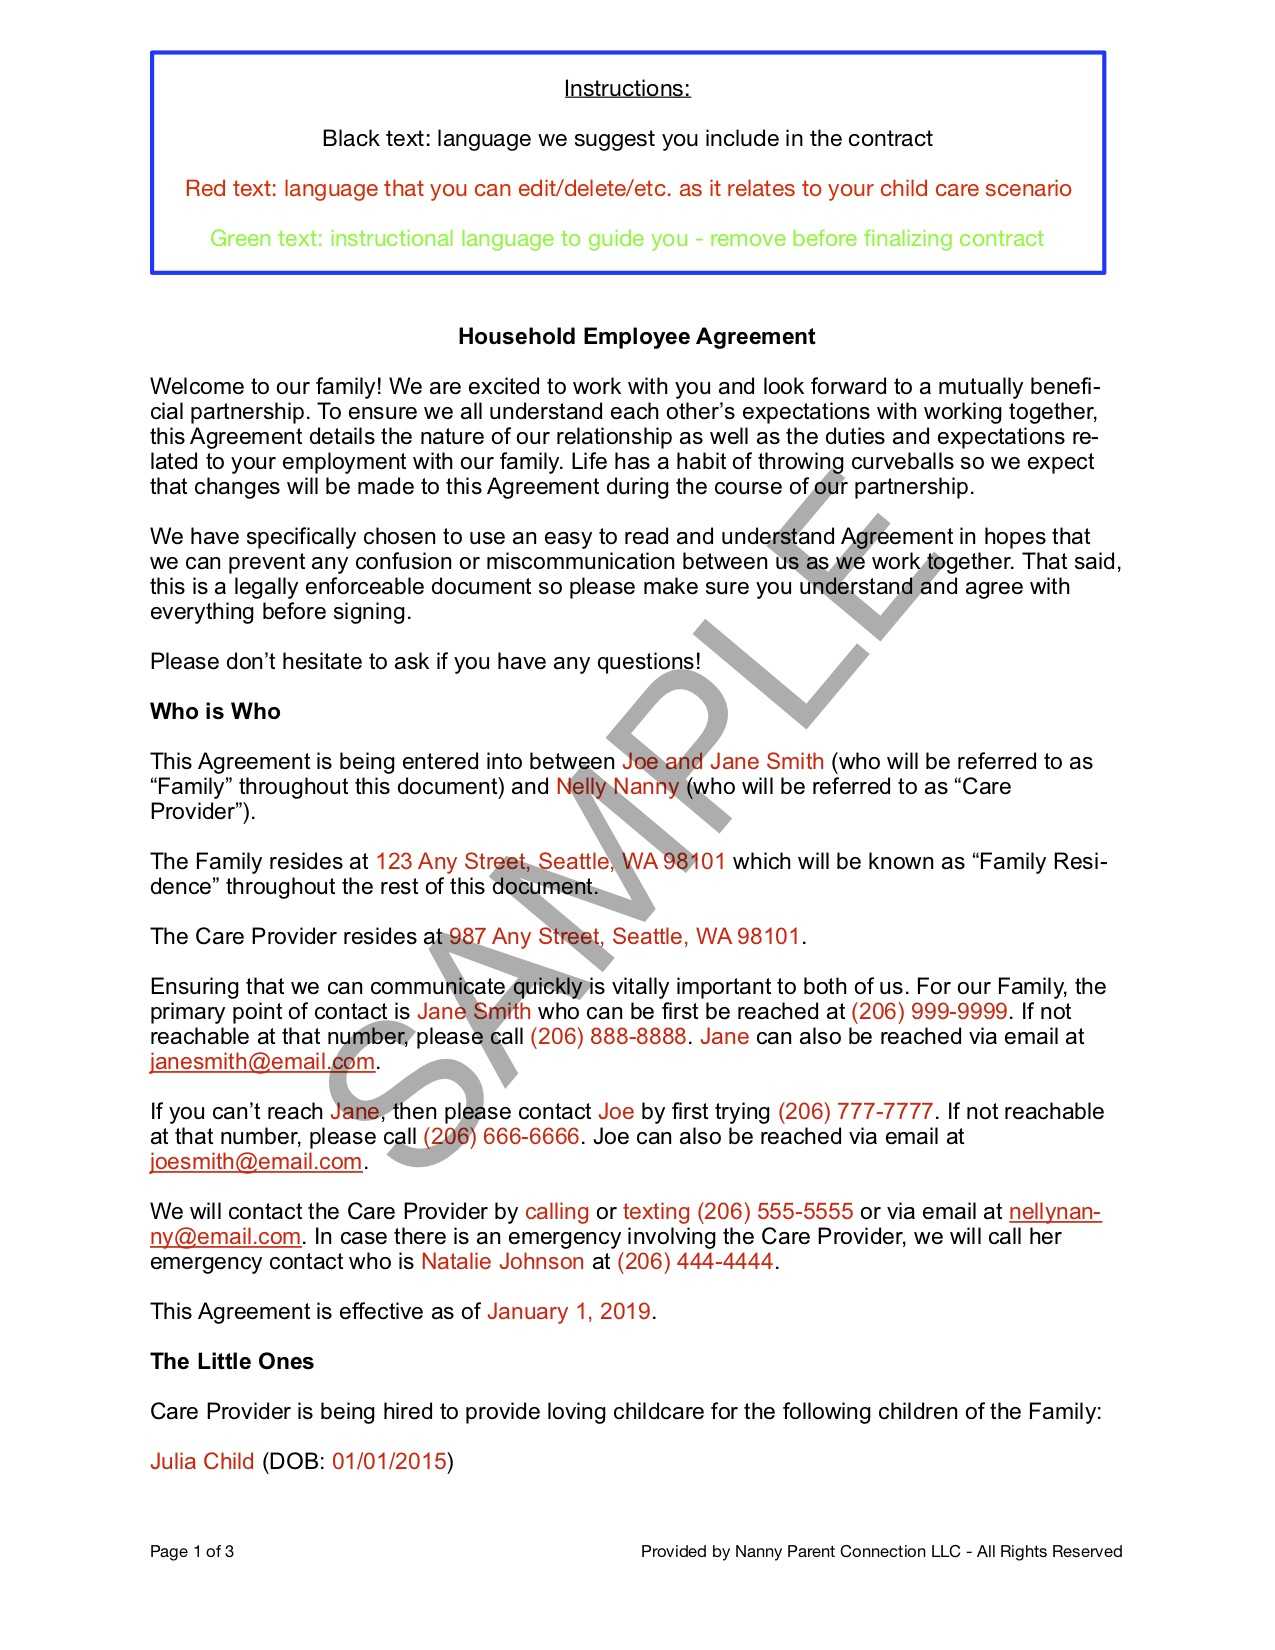 Household Employee Agreement | Nanny Parent Connection Regarding Nanny Contract Template Word